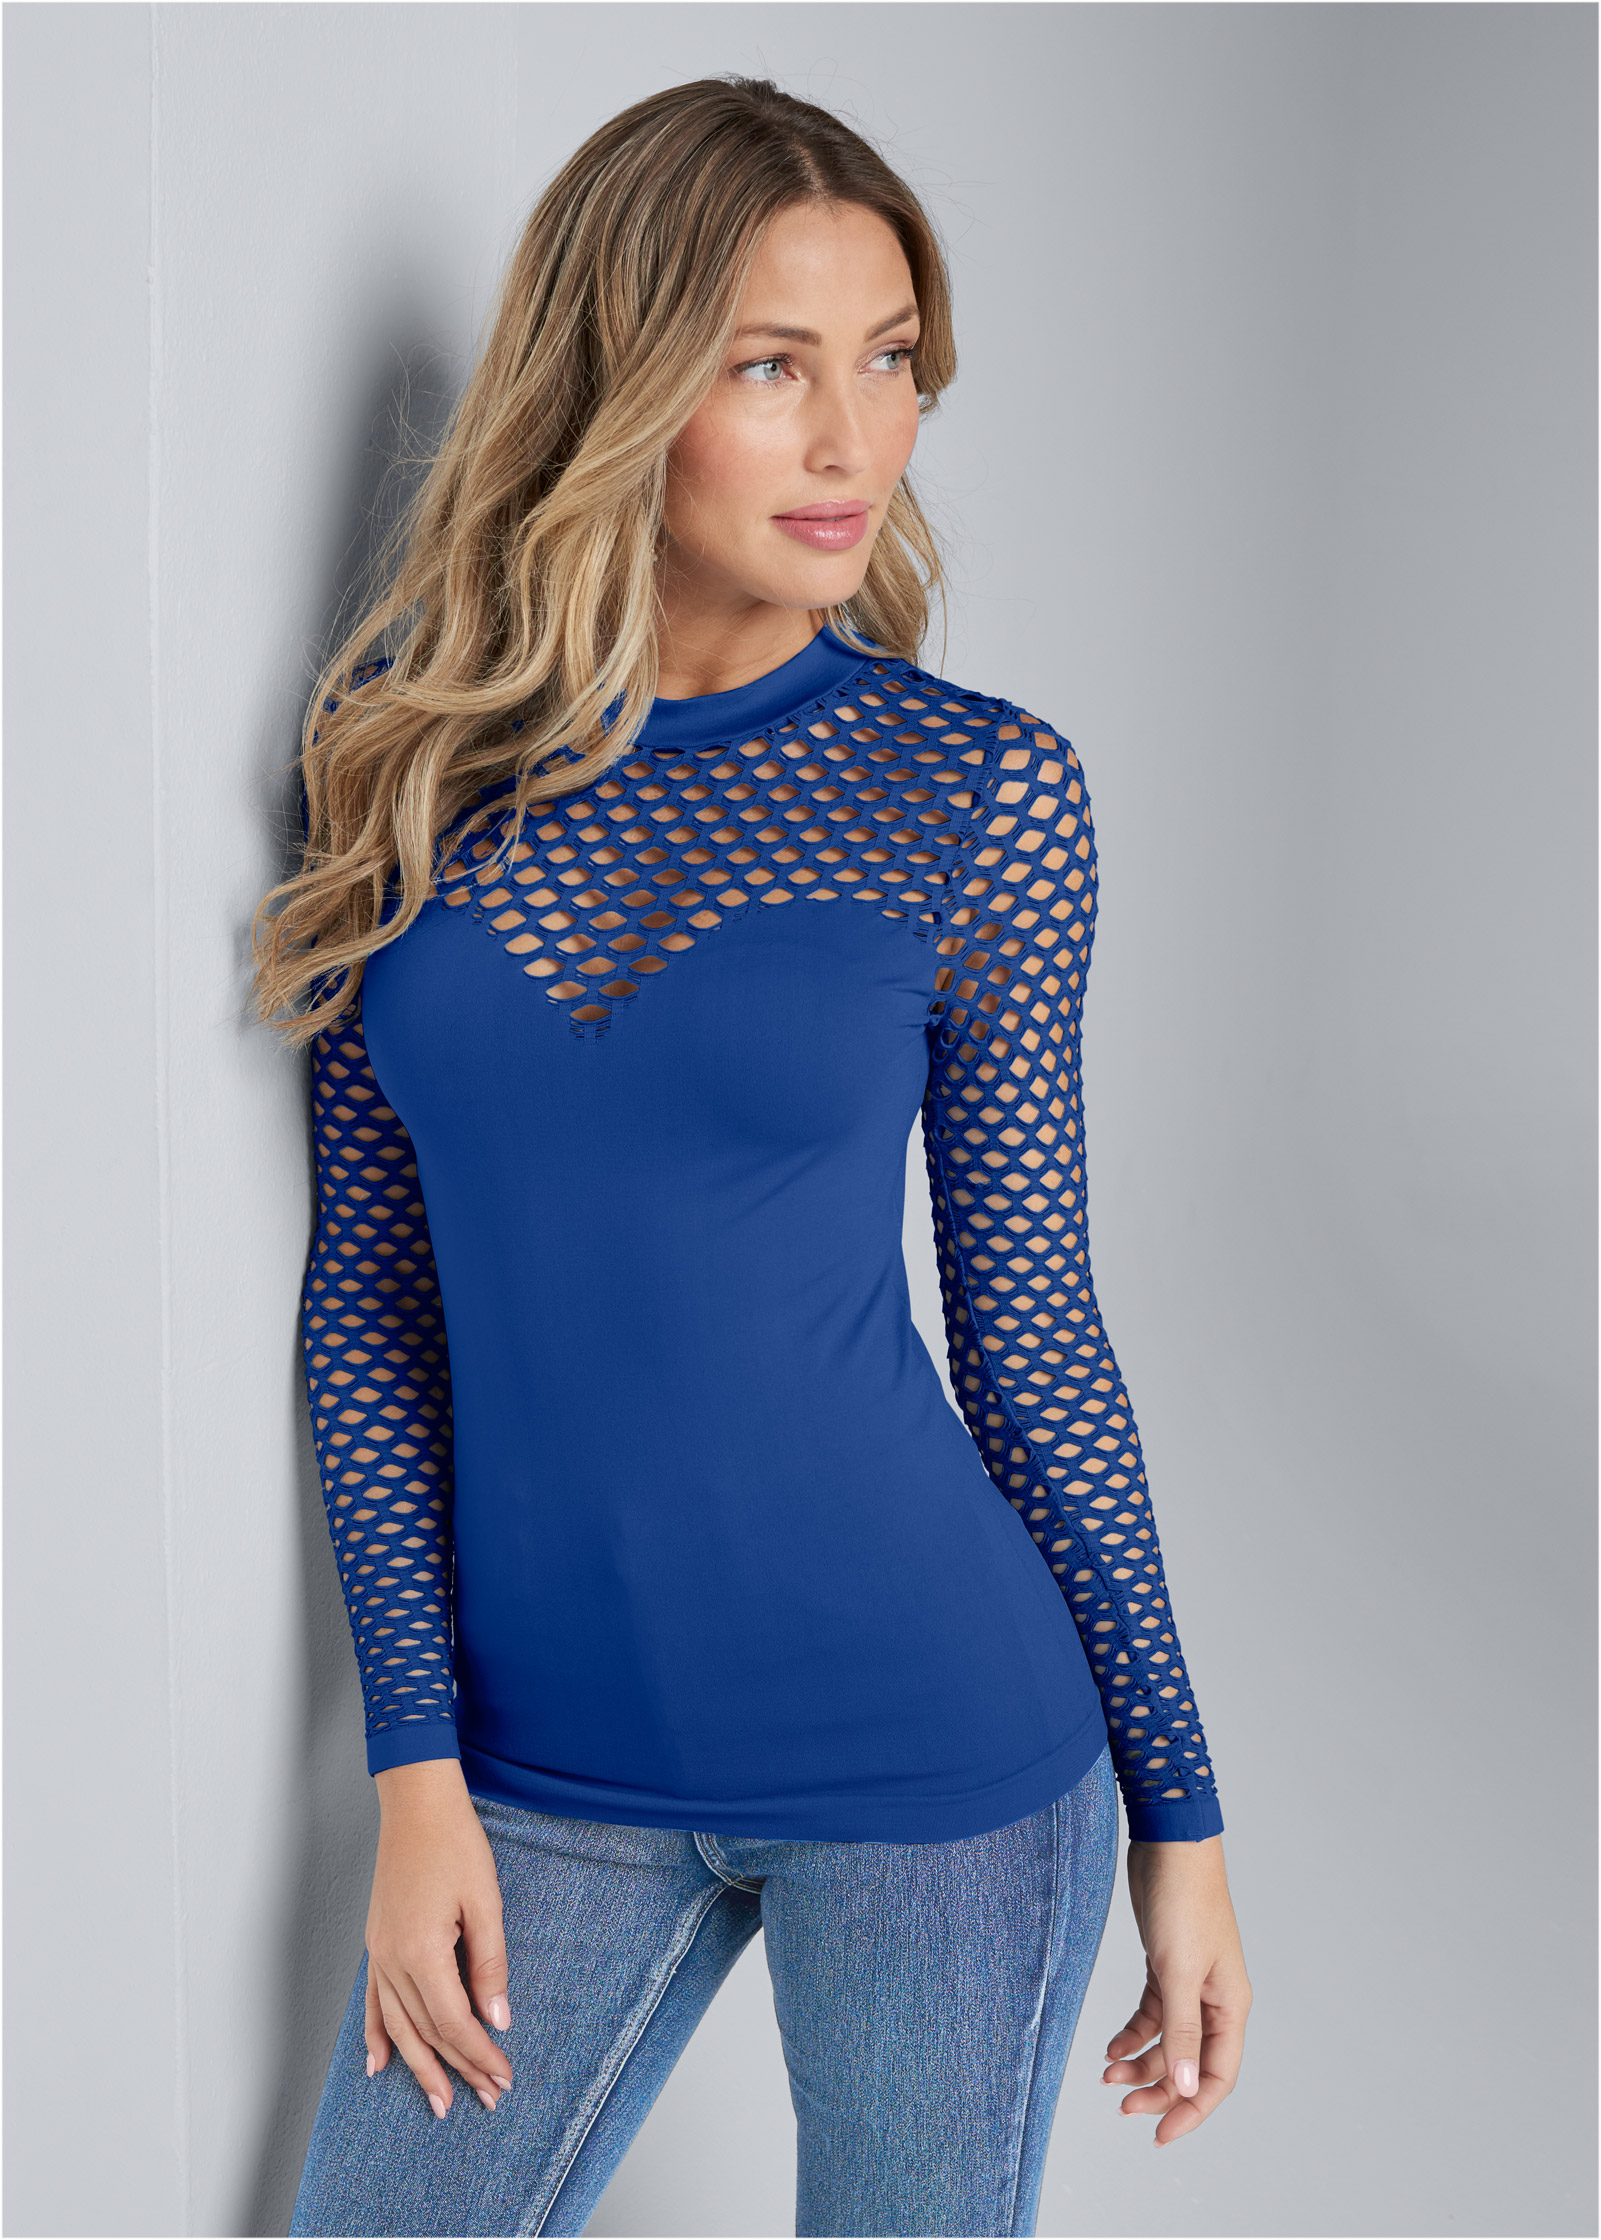 seamless tops wholesale